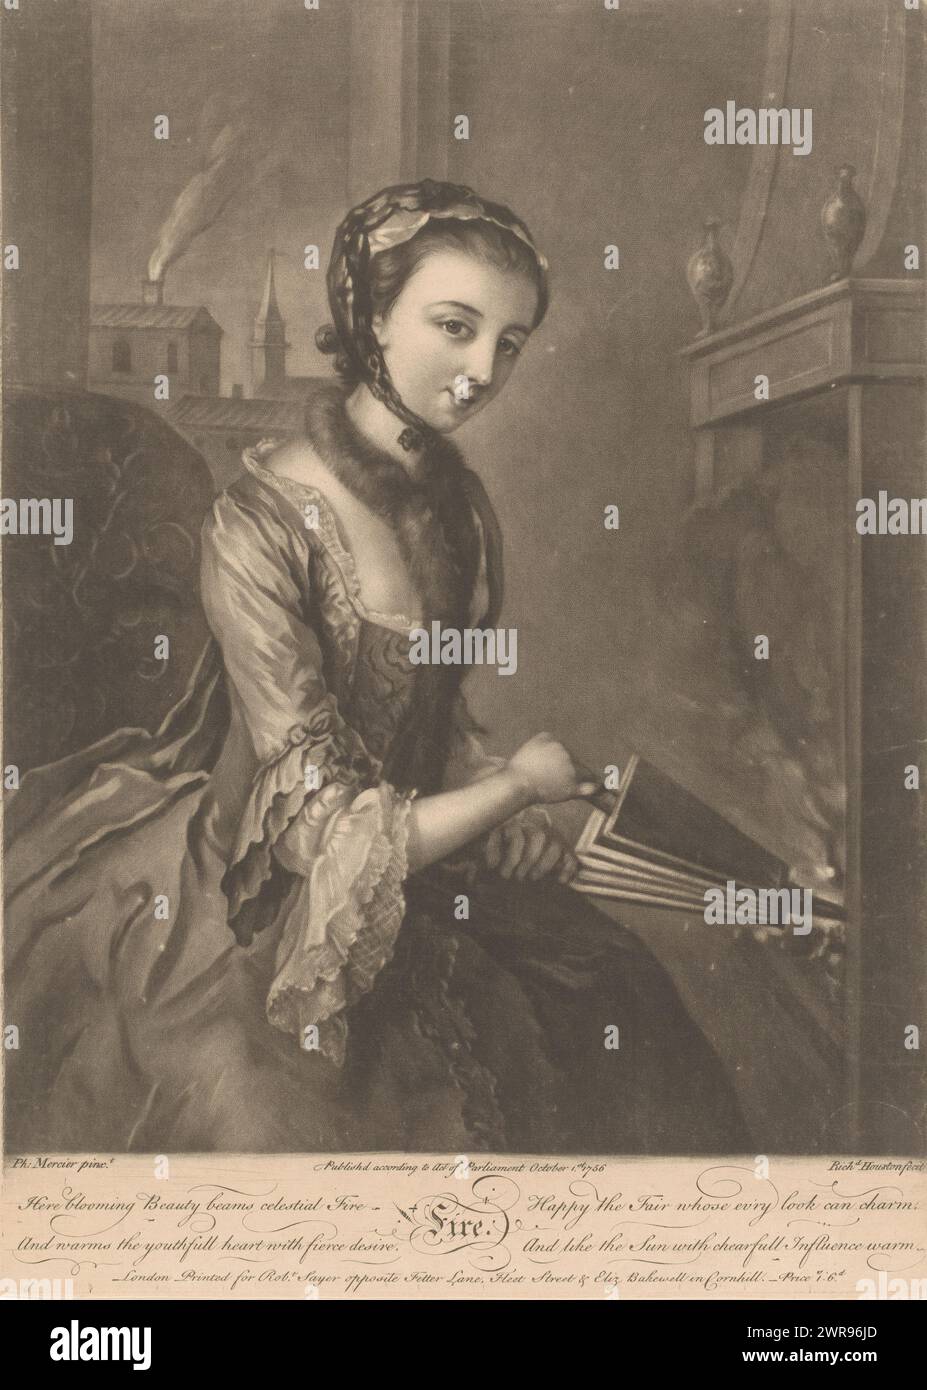 Young woman with a bellows, Fire (title on object), Text in English in the bottom margin., print maker: Richard Houston, after painting by: Philippe Mercier, publisher: Robert Sayer, London, 1756, paper, height 353 mm × width 252 mm, print Stock Photo